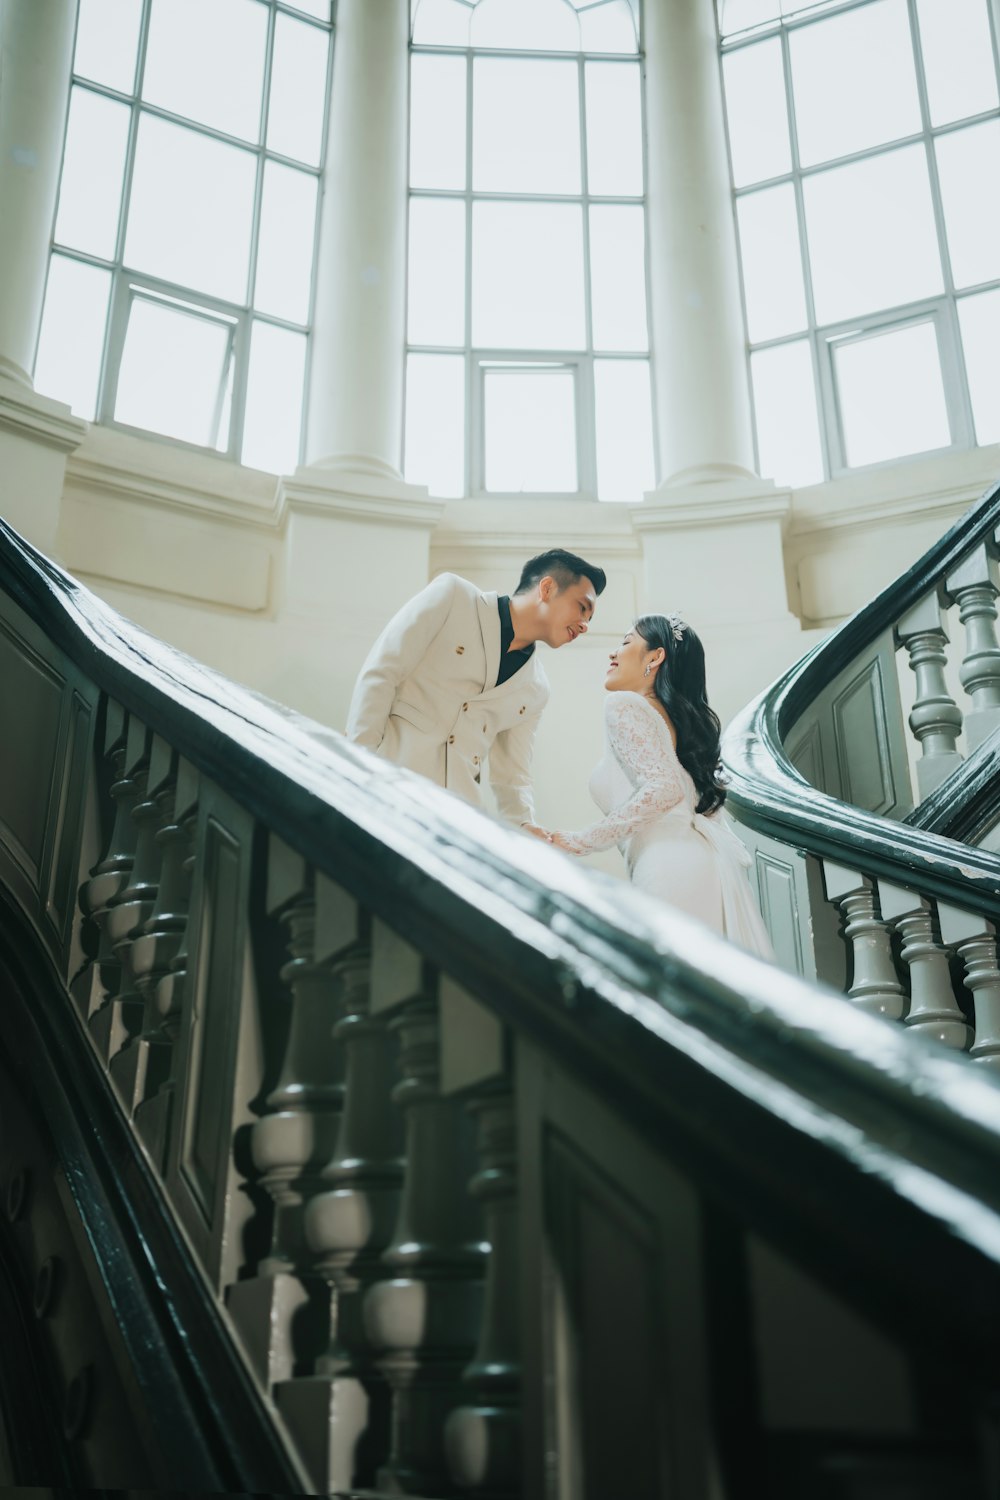 a bride and groom standing on the stairs of a building